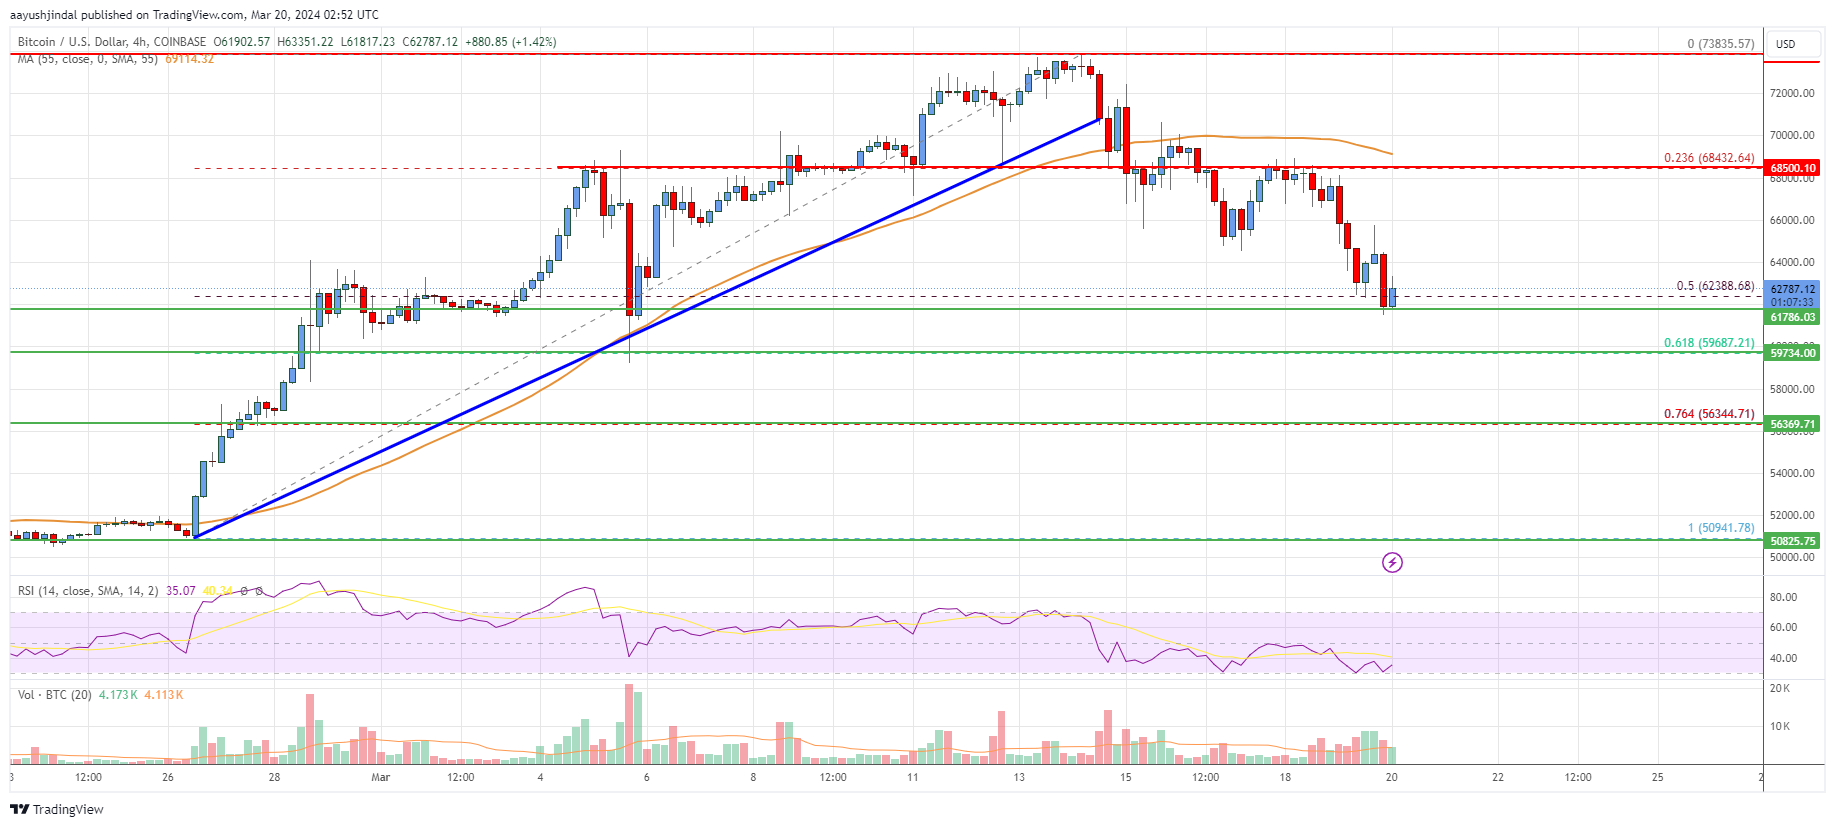 Bitcoin Price Analysis: BTC Dips But Reaches Key Support